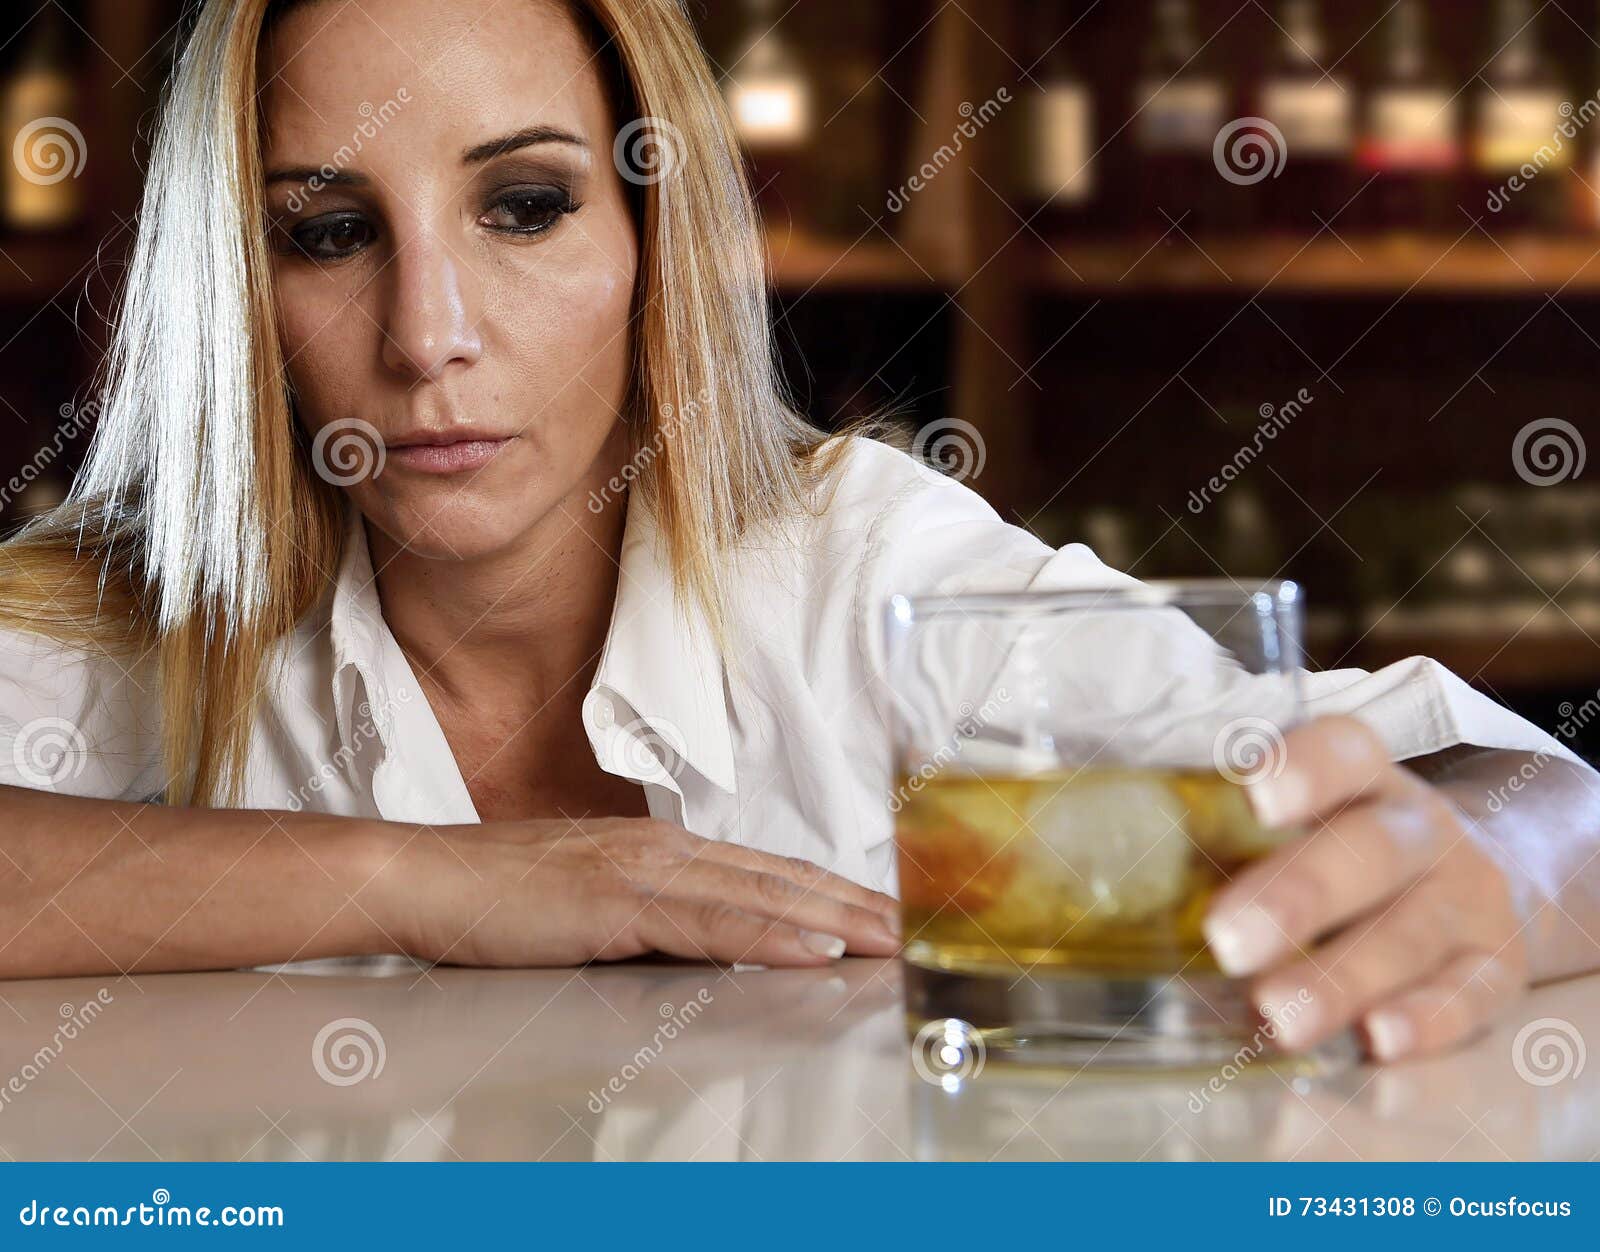 Free Images : person, girl, woman, wine, restaurant, bar, model, young ...